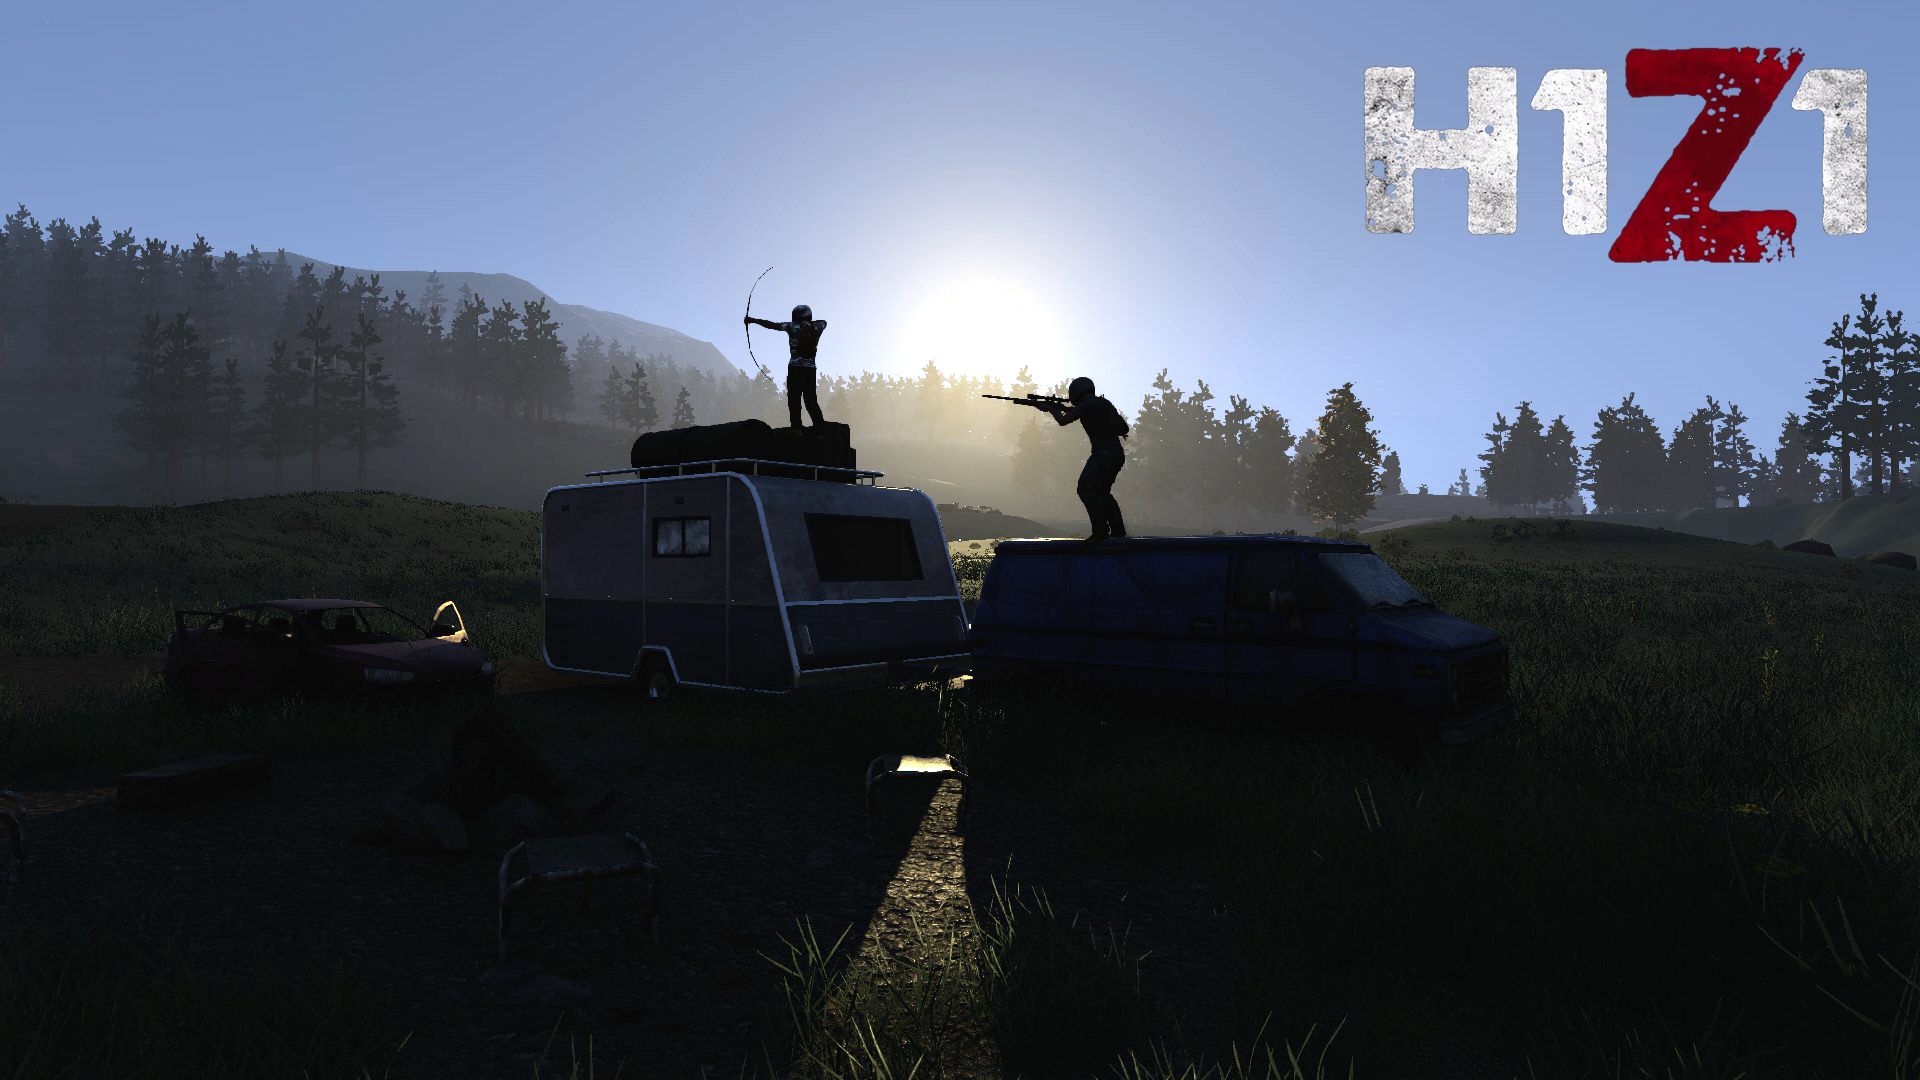 H1z1 Wallpaper - - H1z1 - H1z1 Wallpaper Hd , HD Wallpaper & Backgrounds